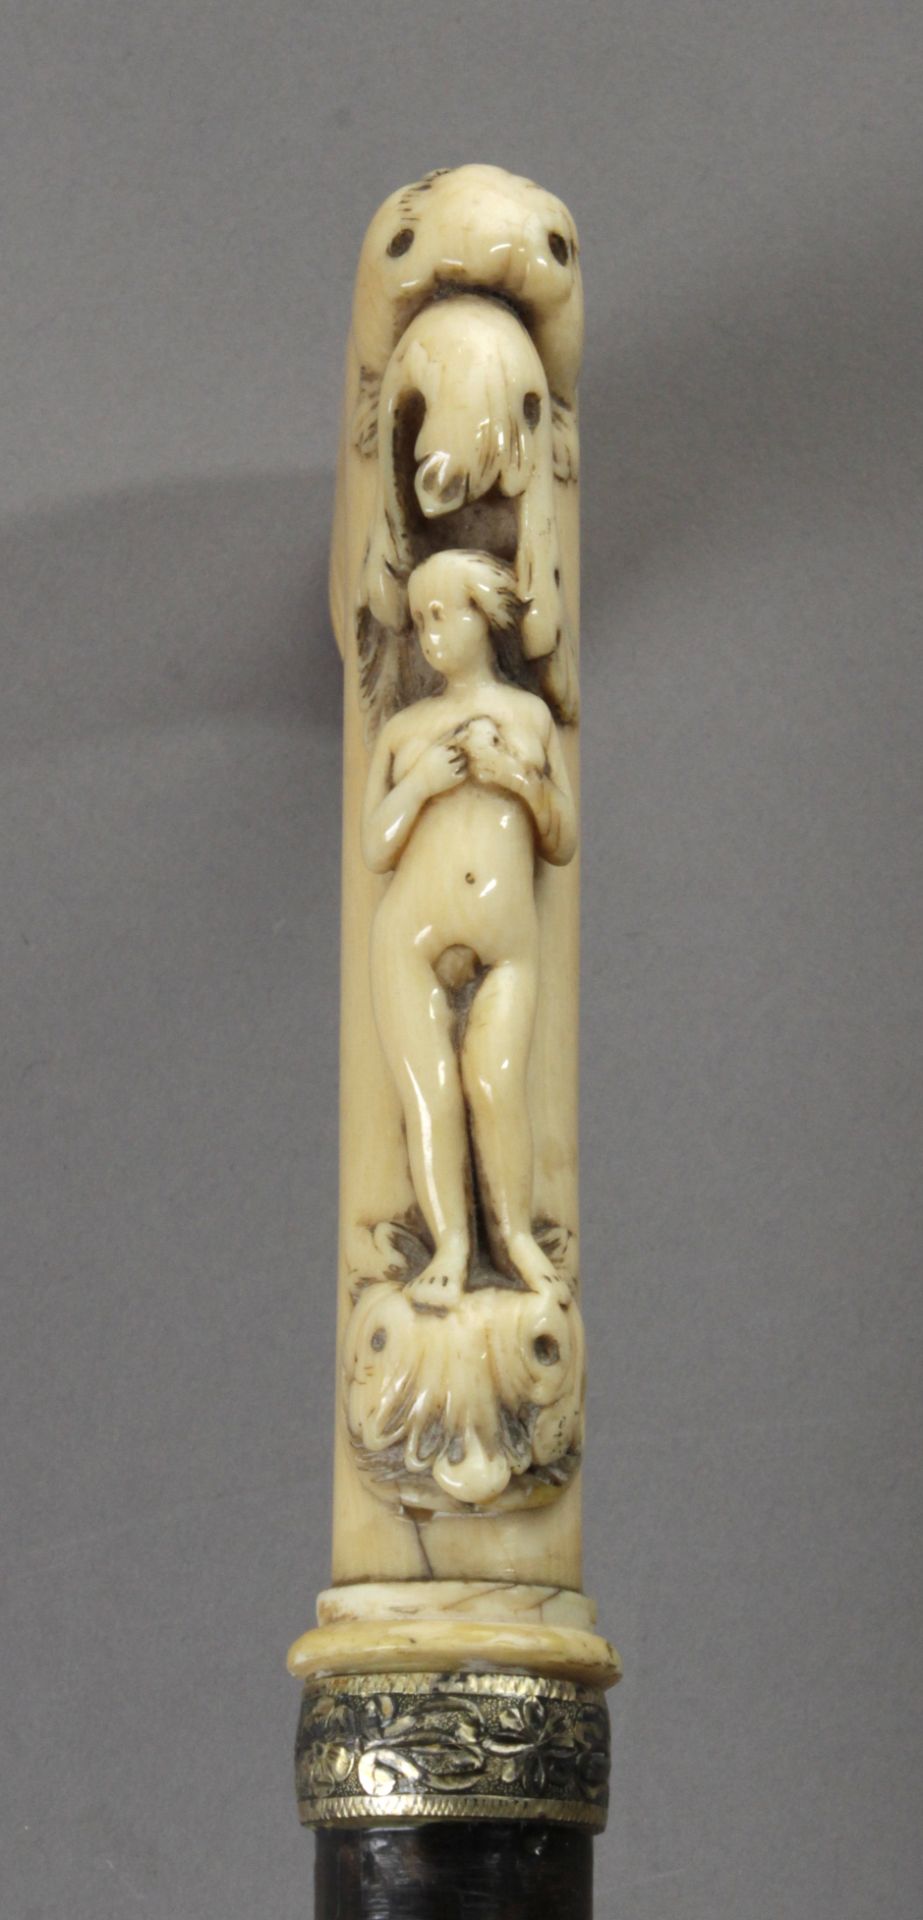 A 19th century European walking cane in carved ebony and ivory